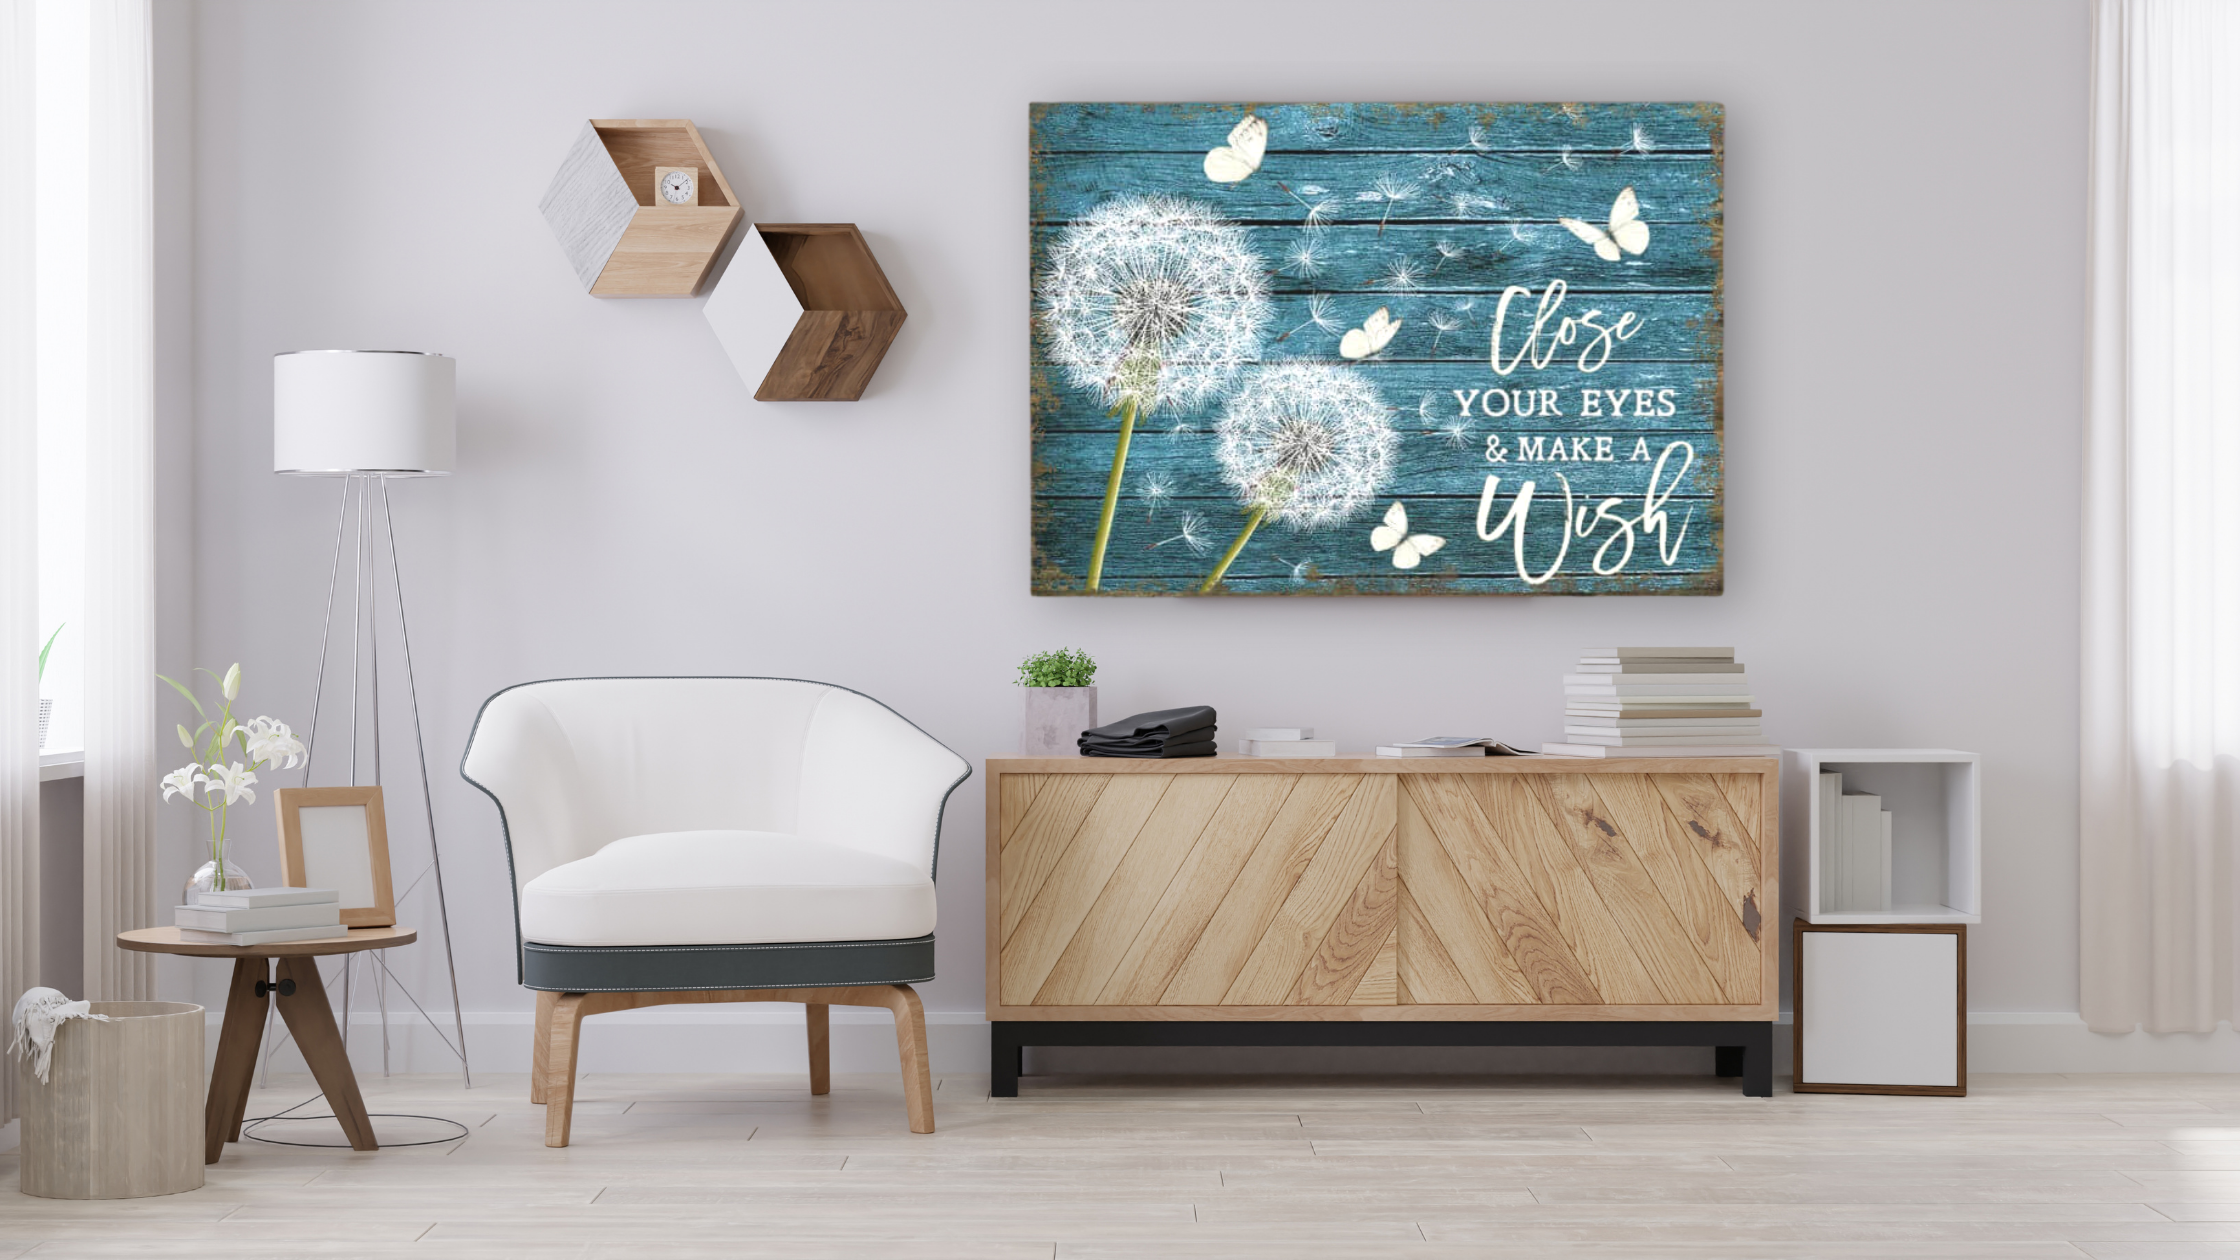 https://wallcharmers.com/collections/canvas-wall-art/products/canvas-painting-beautiful-dandelion-and-butterfly-close-your-eyes-and-make-a-wish-canvas-wall-art